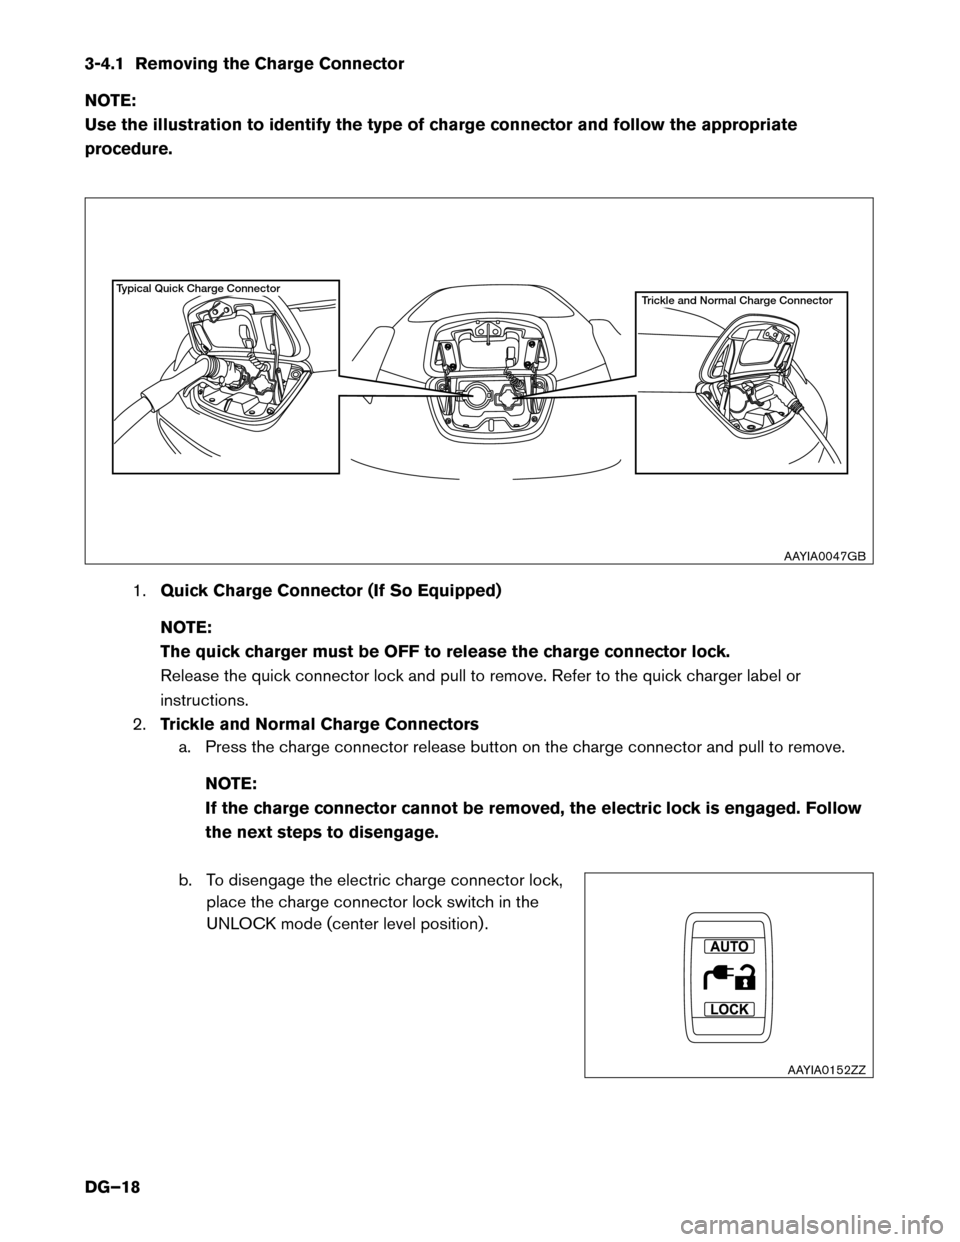 NISSAN LEAF 2014 1.G Dismantling Guide 3-4.1 Removing the Charge Connector
NO
TE:
Use the illustration to identify the type of charge connector and follow the appropriate
procedure.
1.Quick Charge Connector (If So Equipped)
NOTE:
The quick